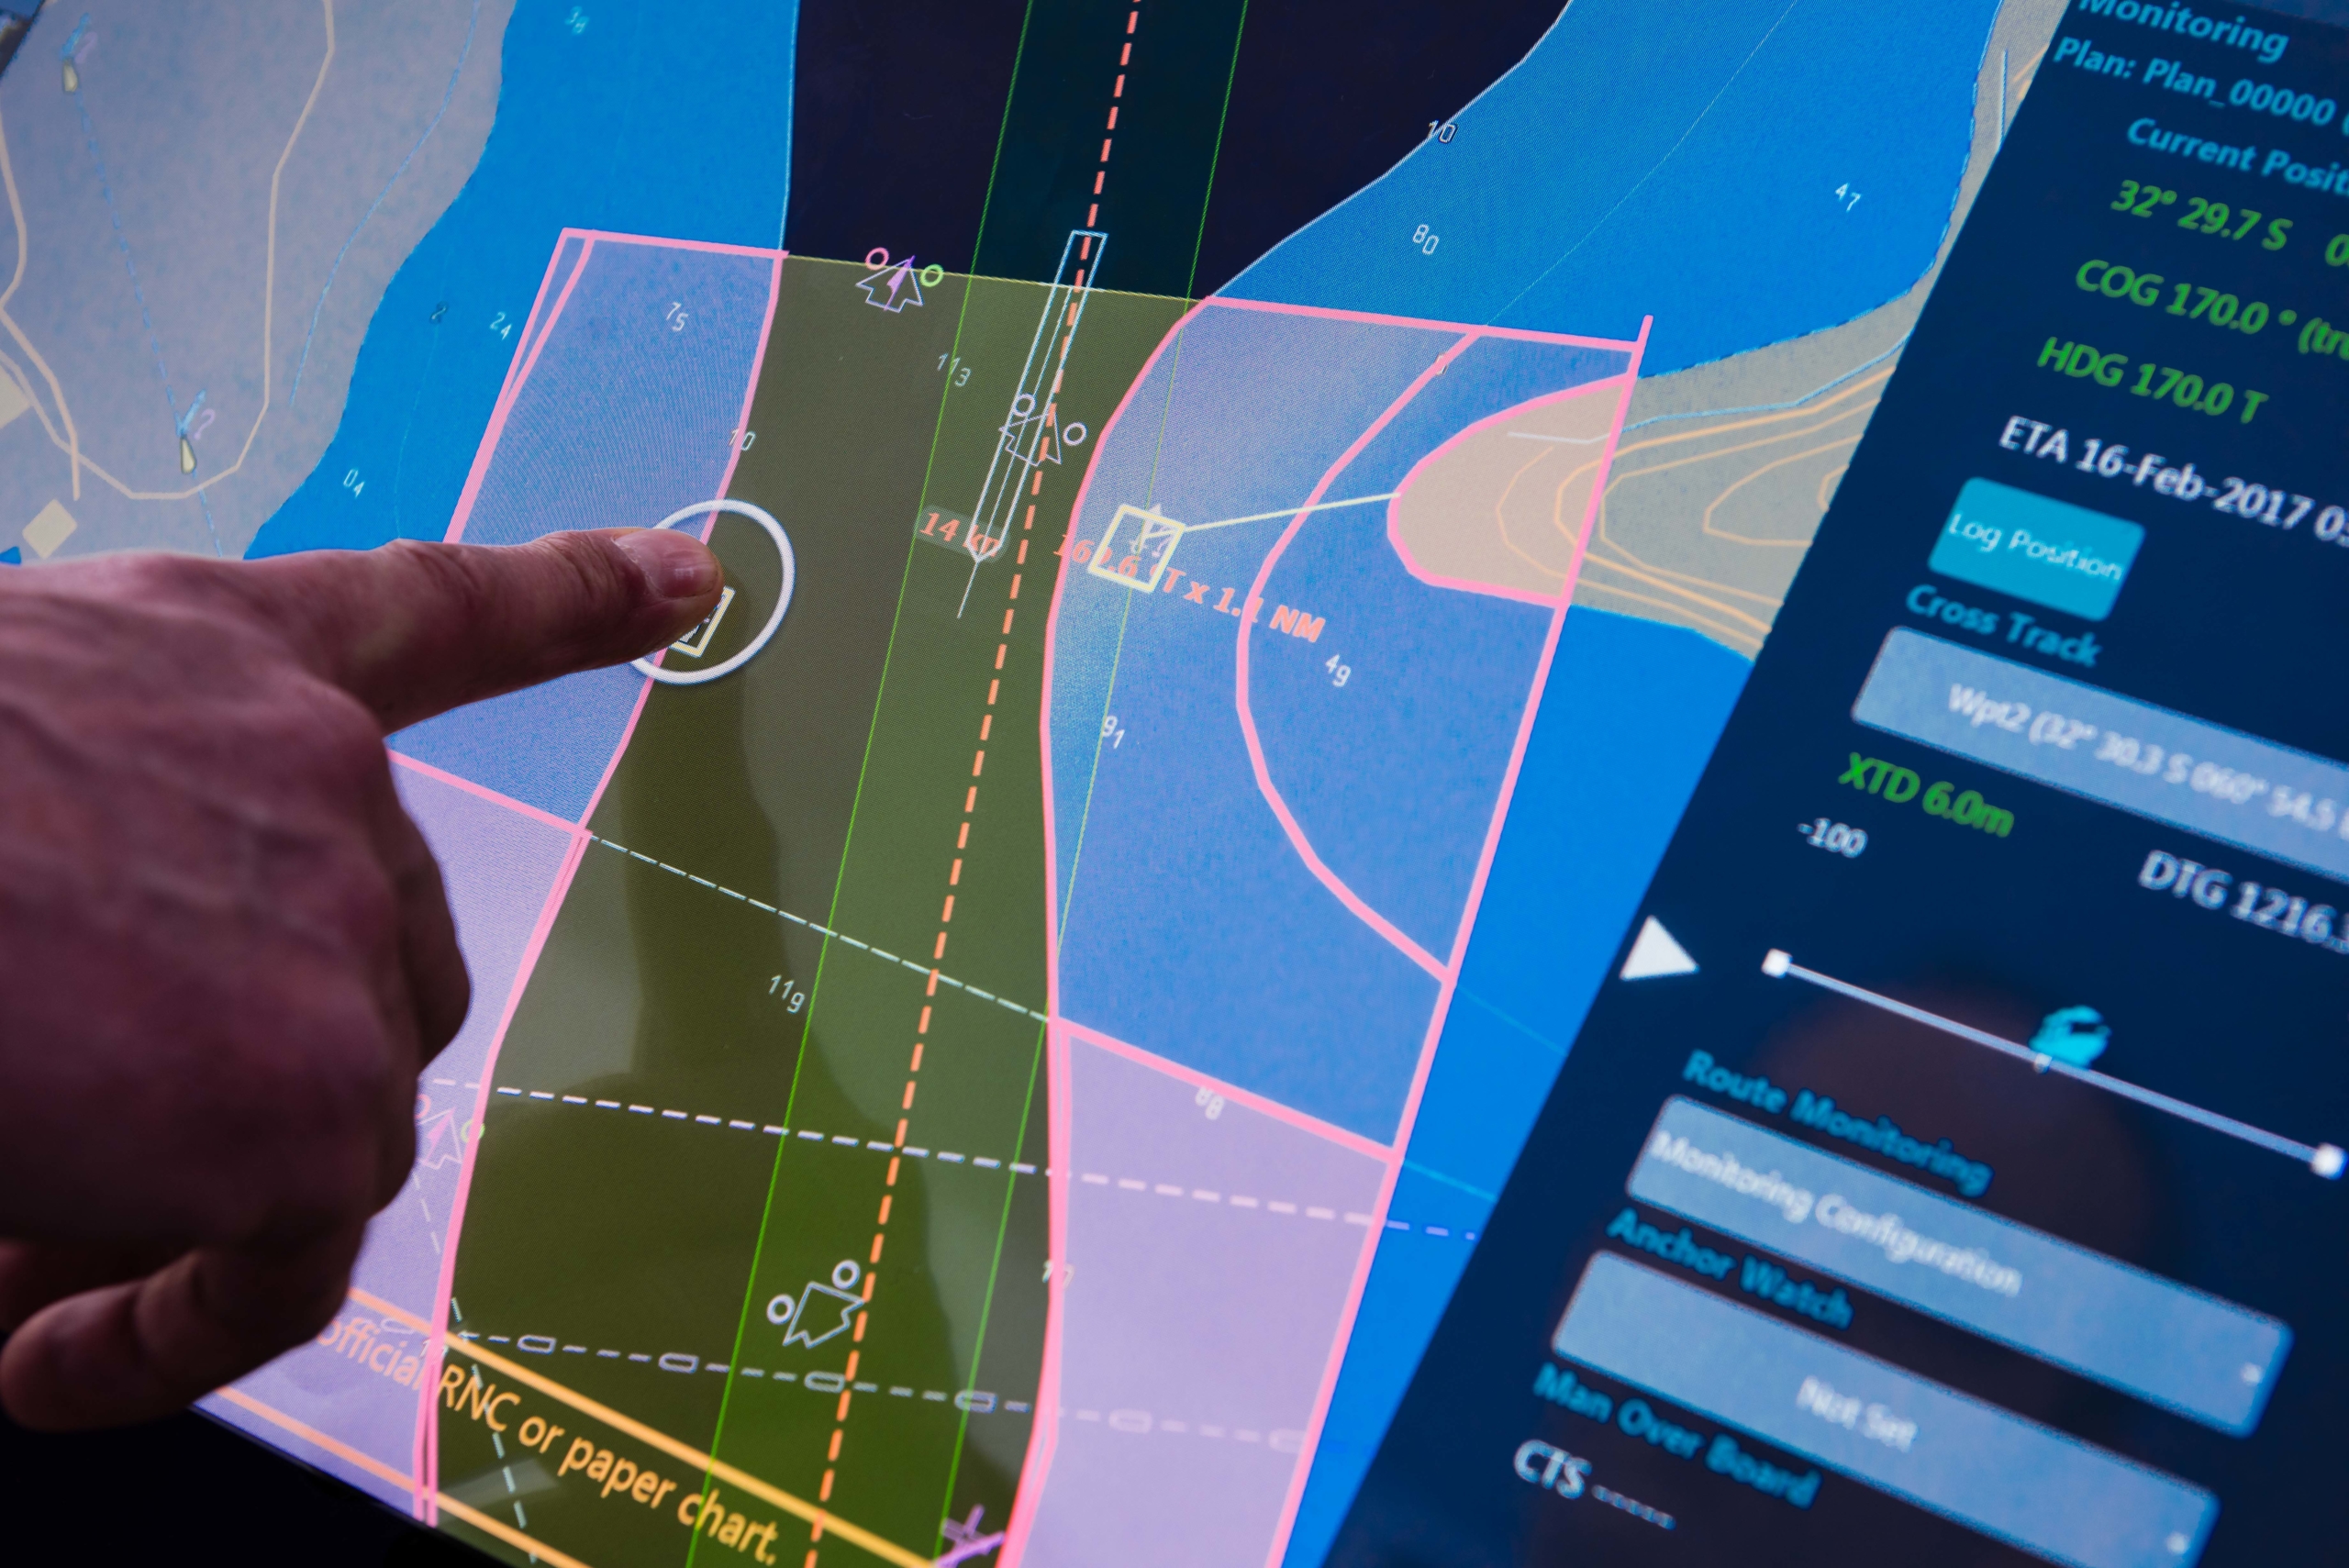 GNS and SEALL announce a strategic partnership to deliver next generation integrated ECDIS and navigation software solutions